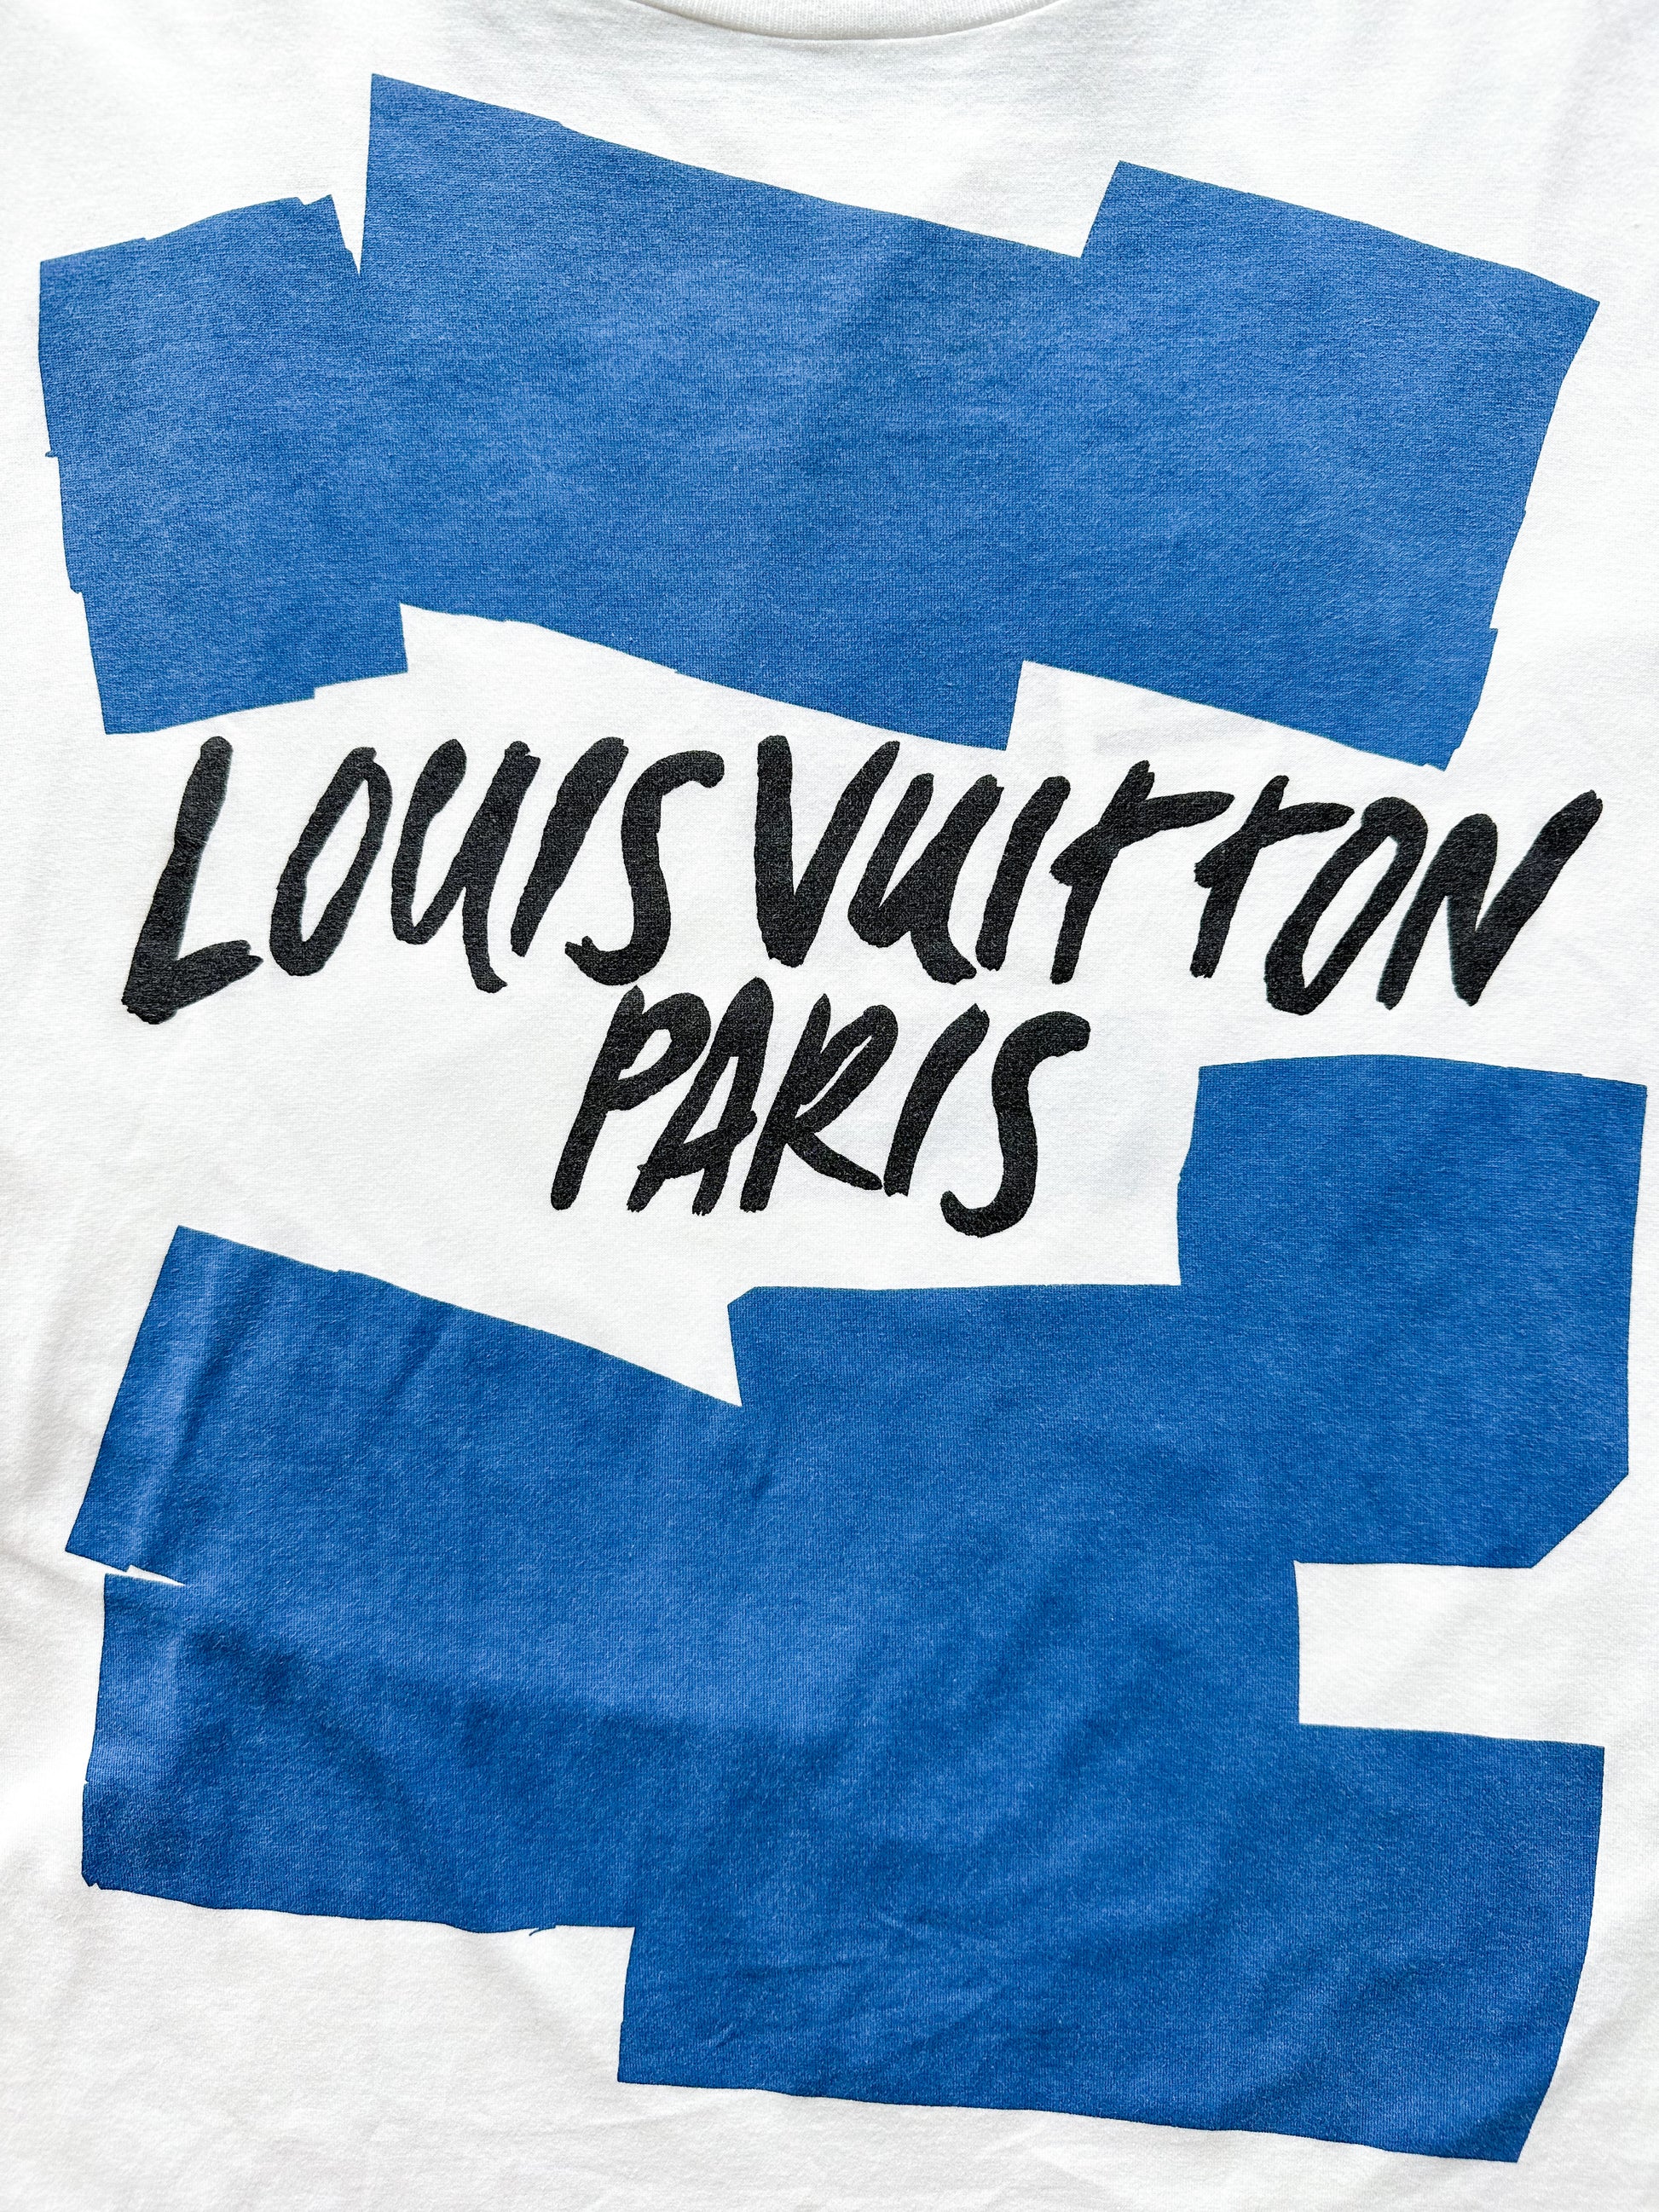 LOUIS VUITTONMALLETIER PARIS 1854 IN RED PRINT, Luxury, Apparel on  Carousell